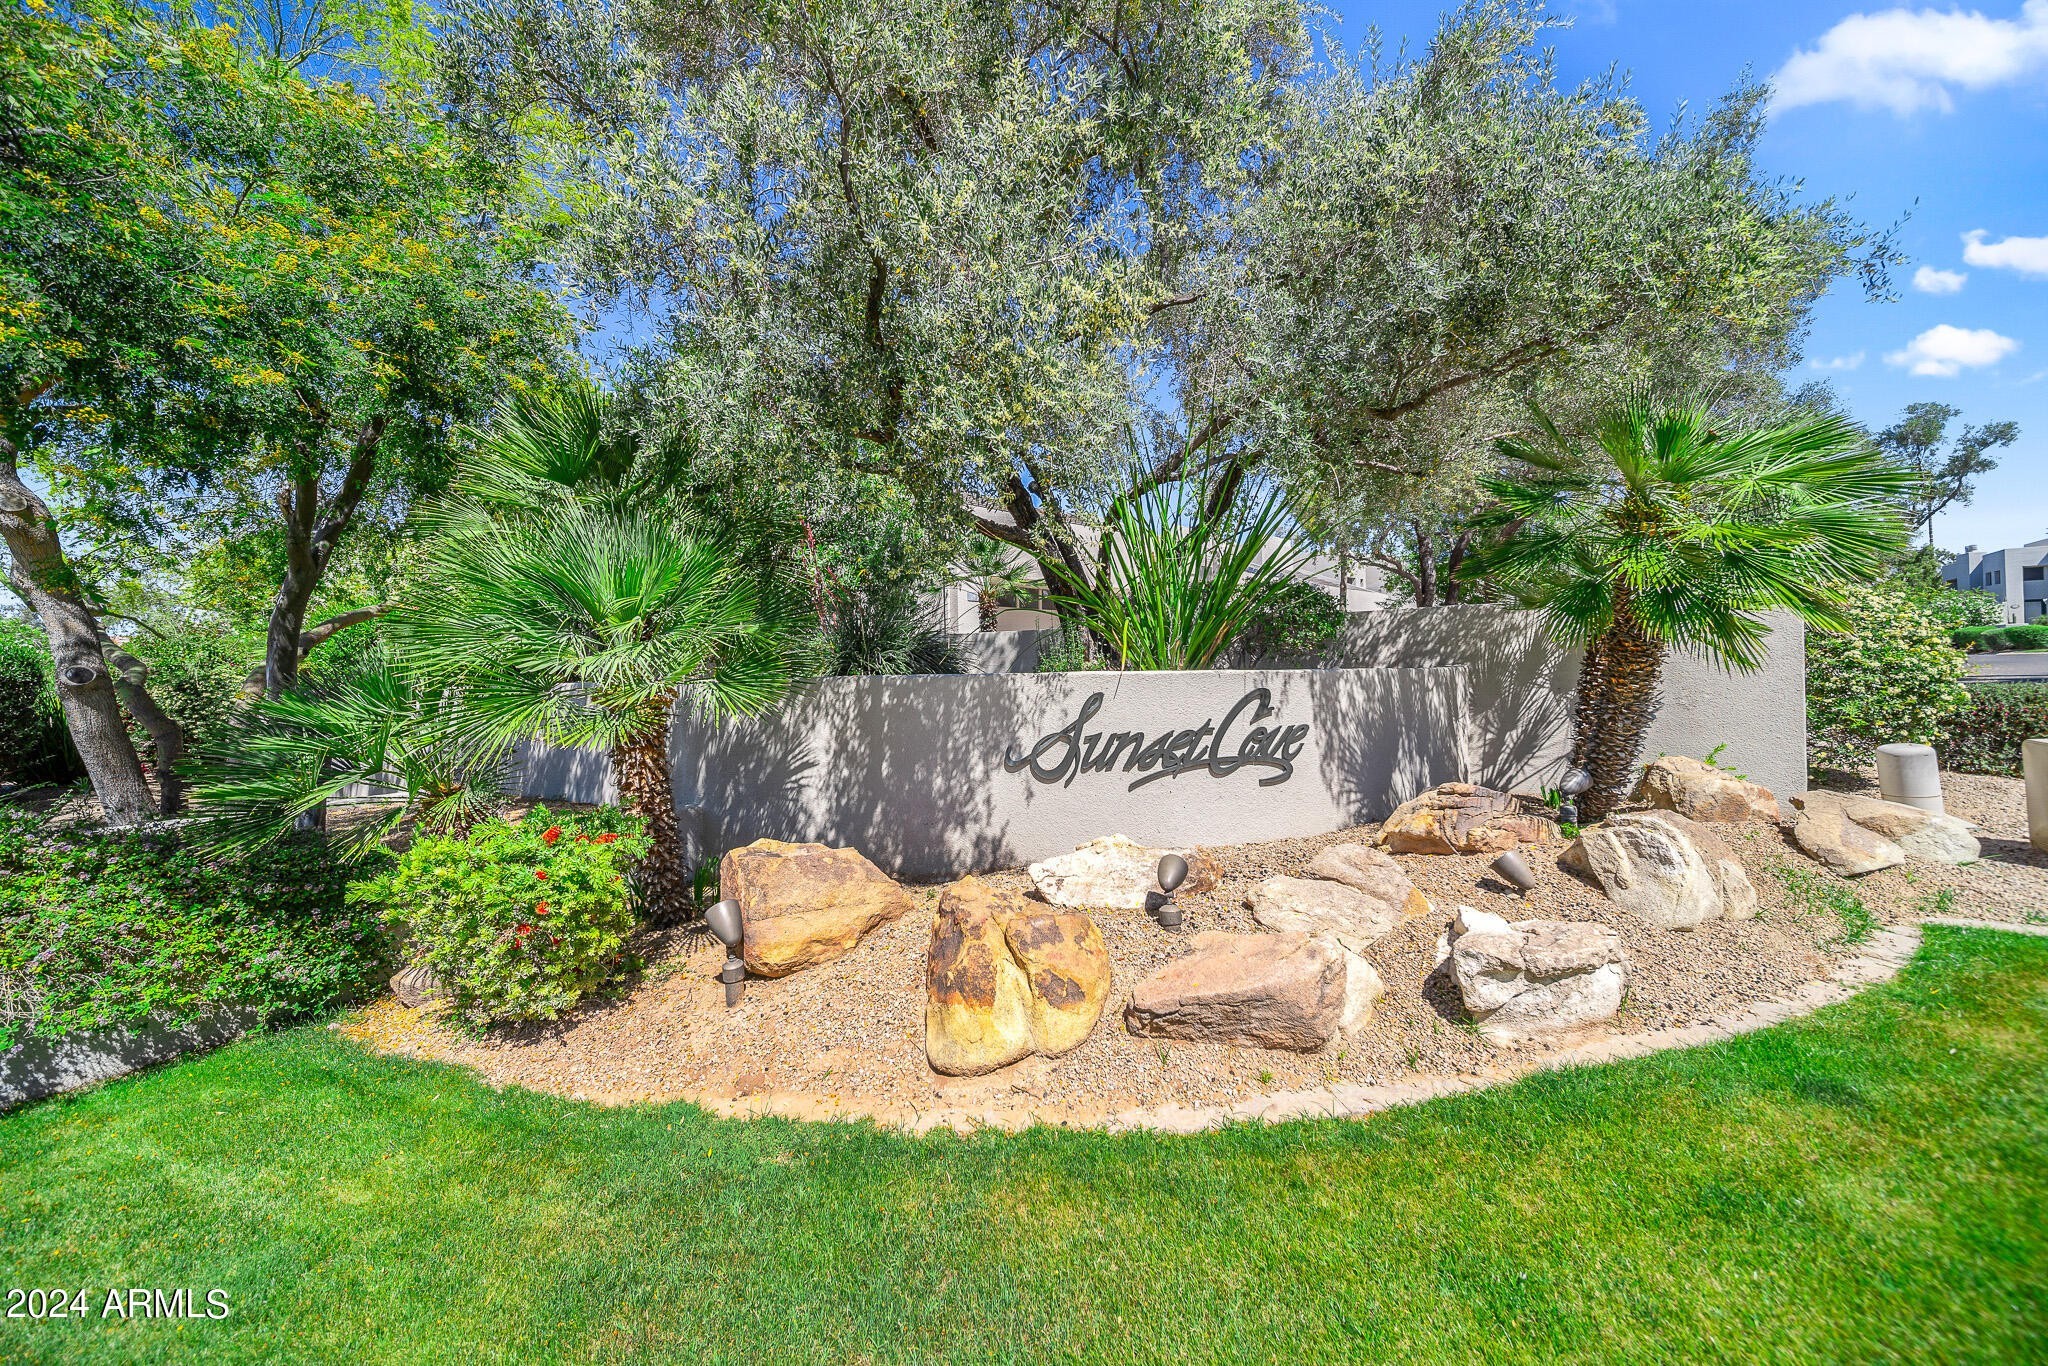 2. 7700 E Gainey Ranch Road